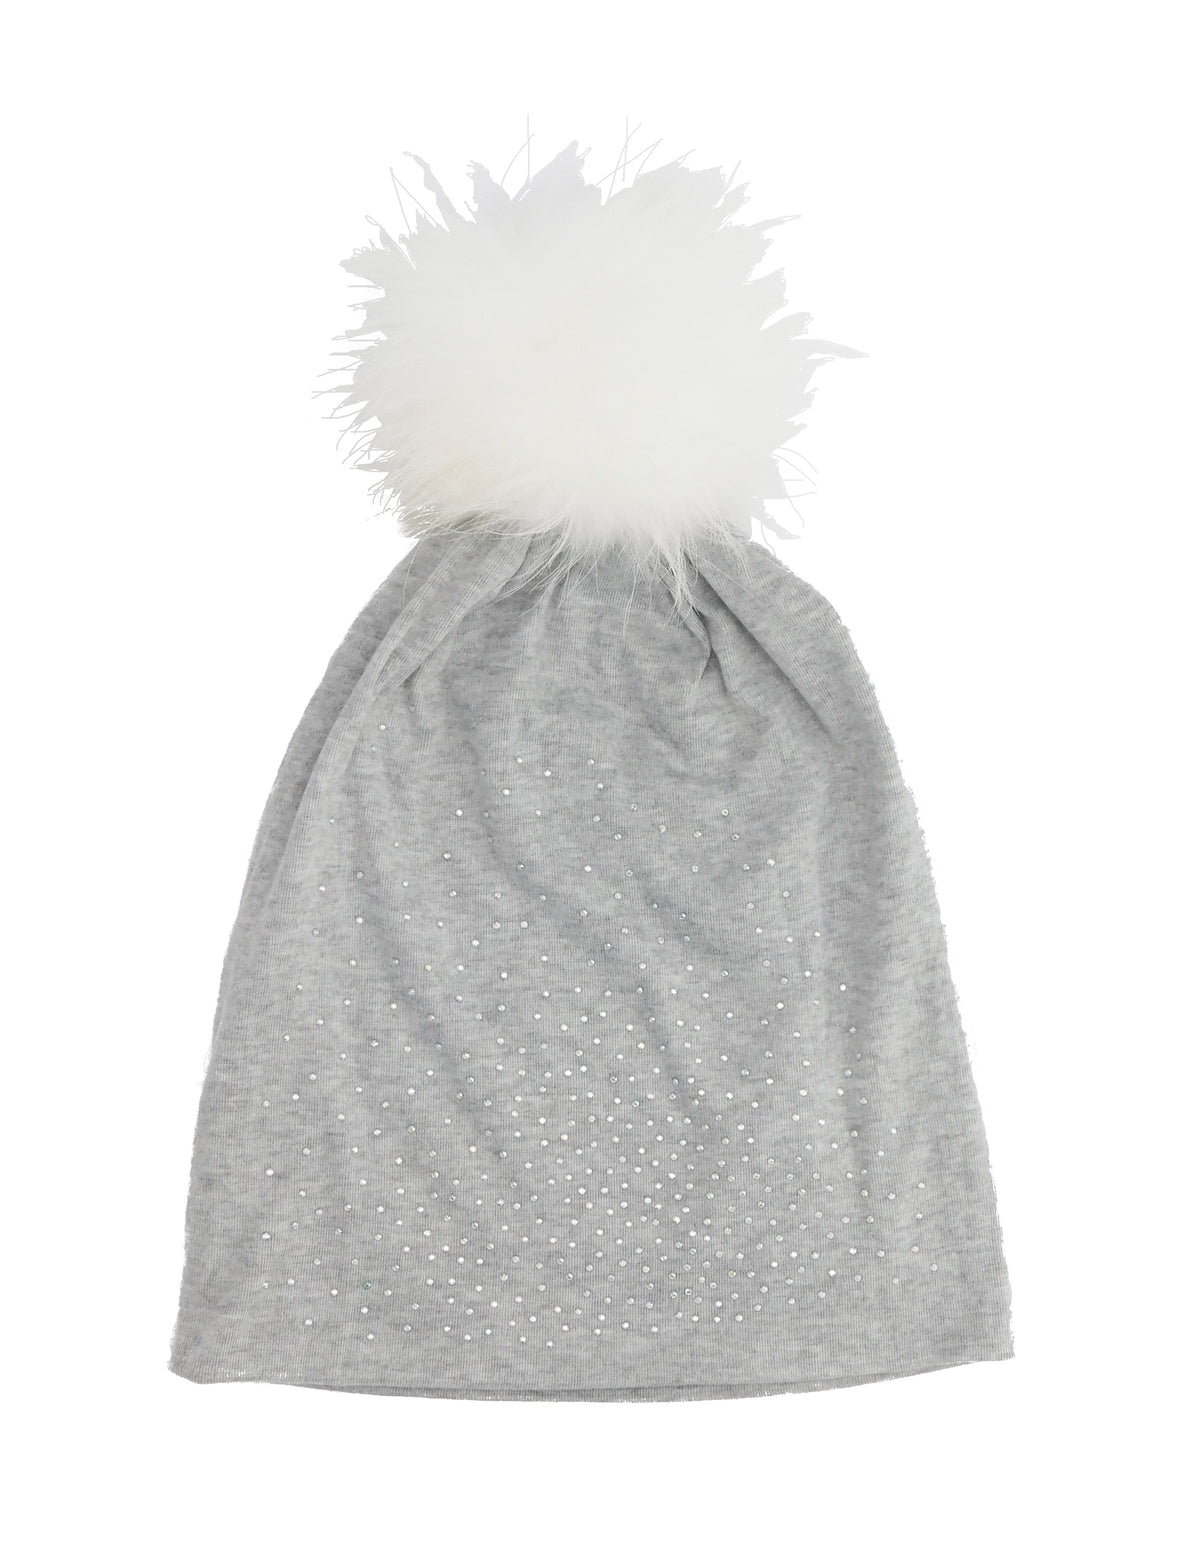 Jeweled Jersey Beanie with Removable Fox Pom In Many Colors - paulamariecollection